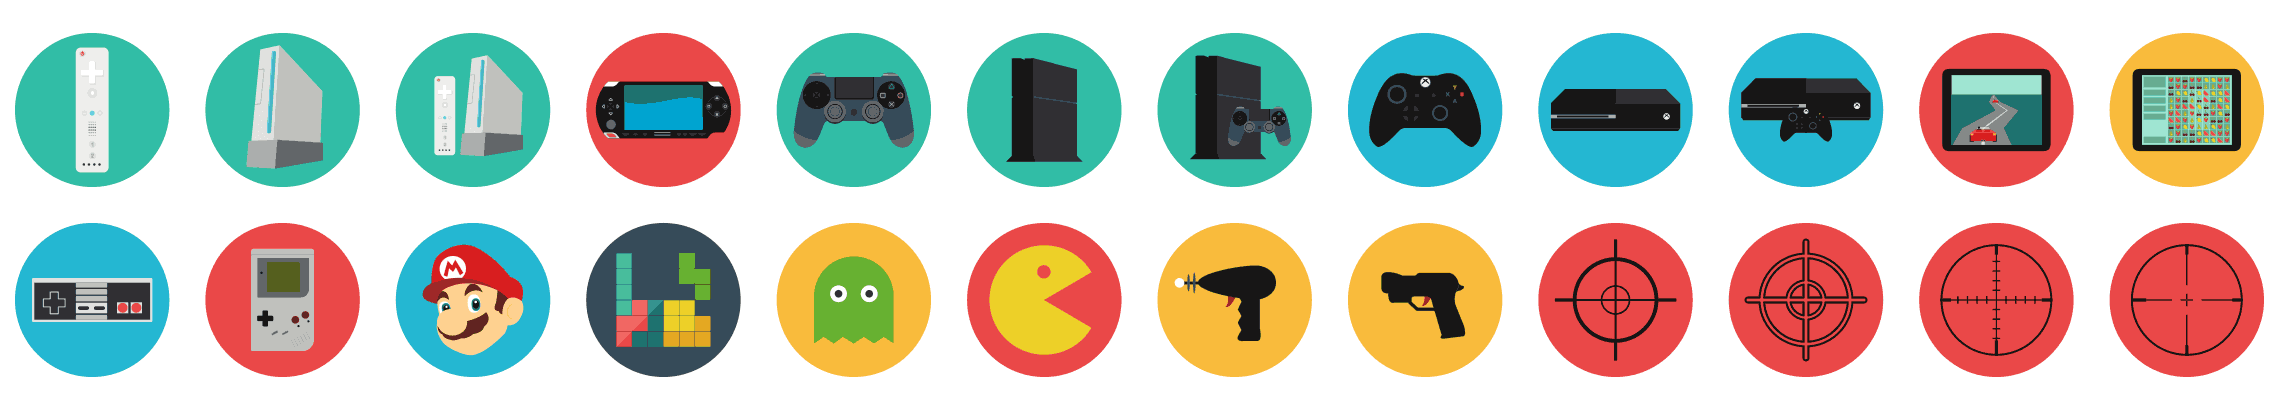 gaming-flat-icons-vol-1-preview